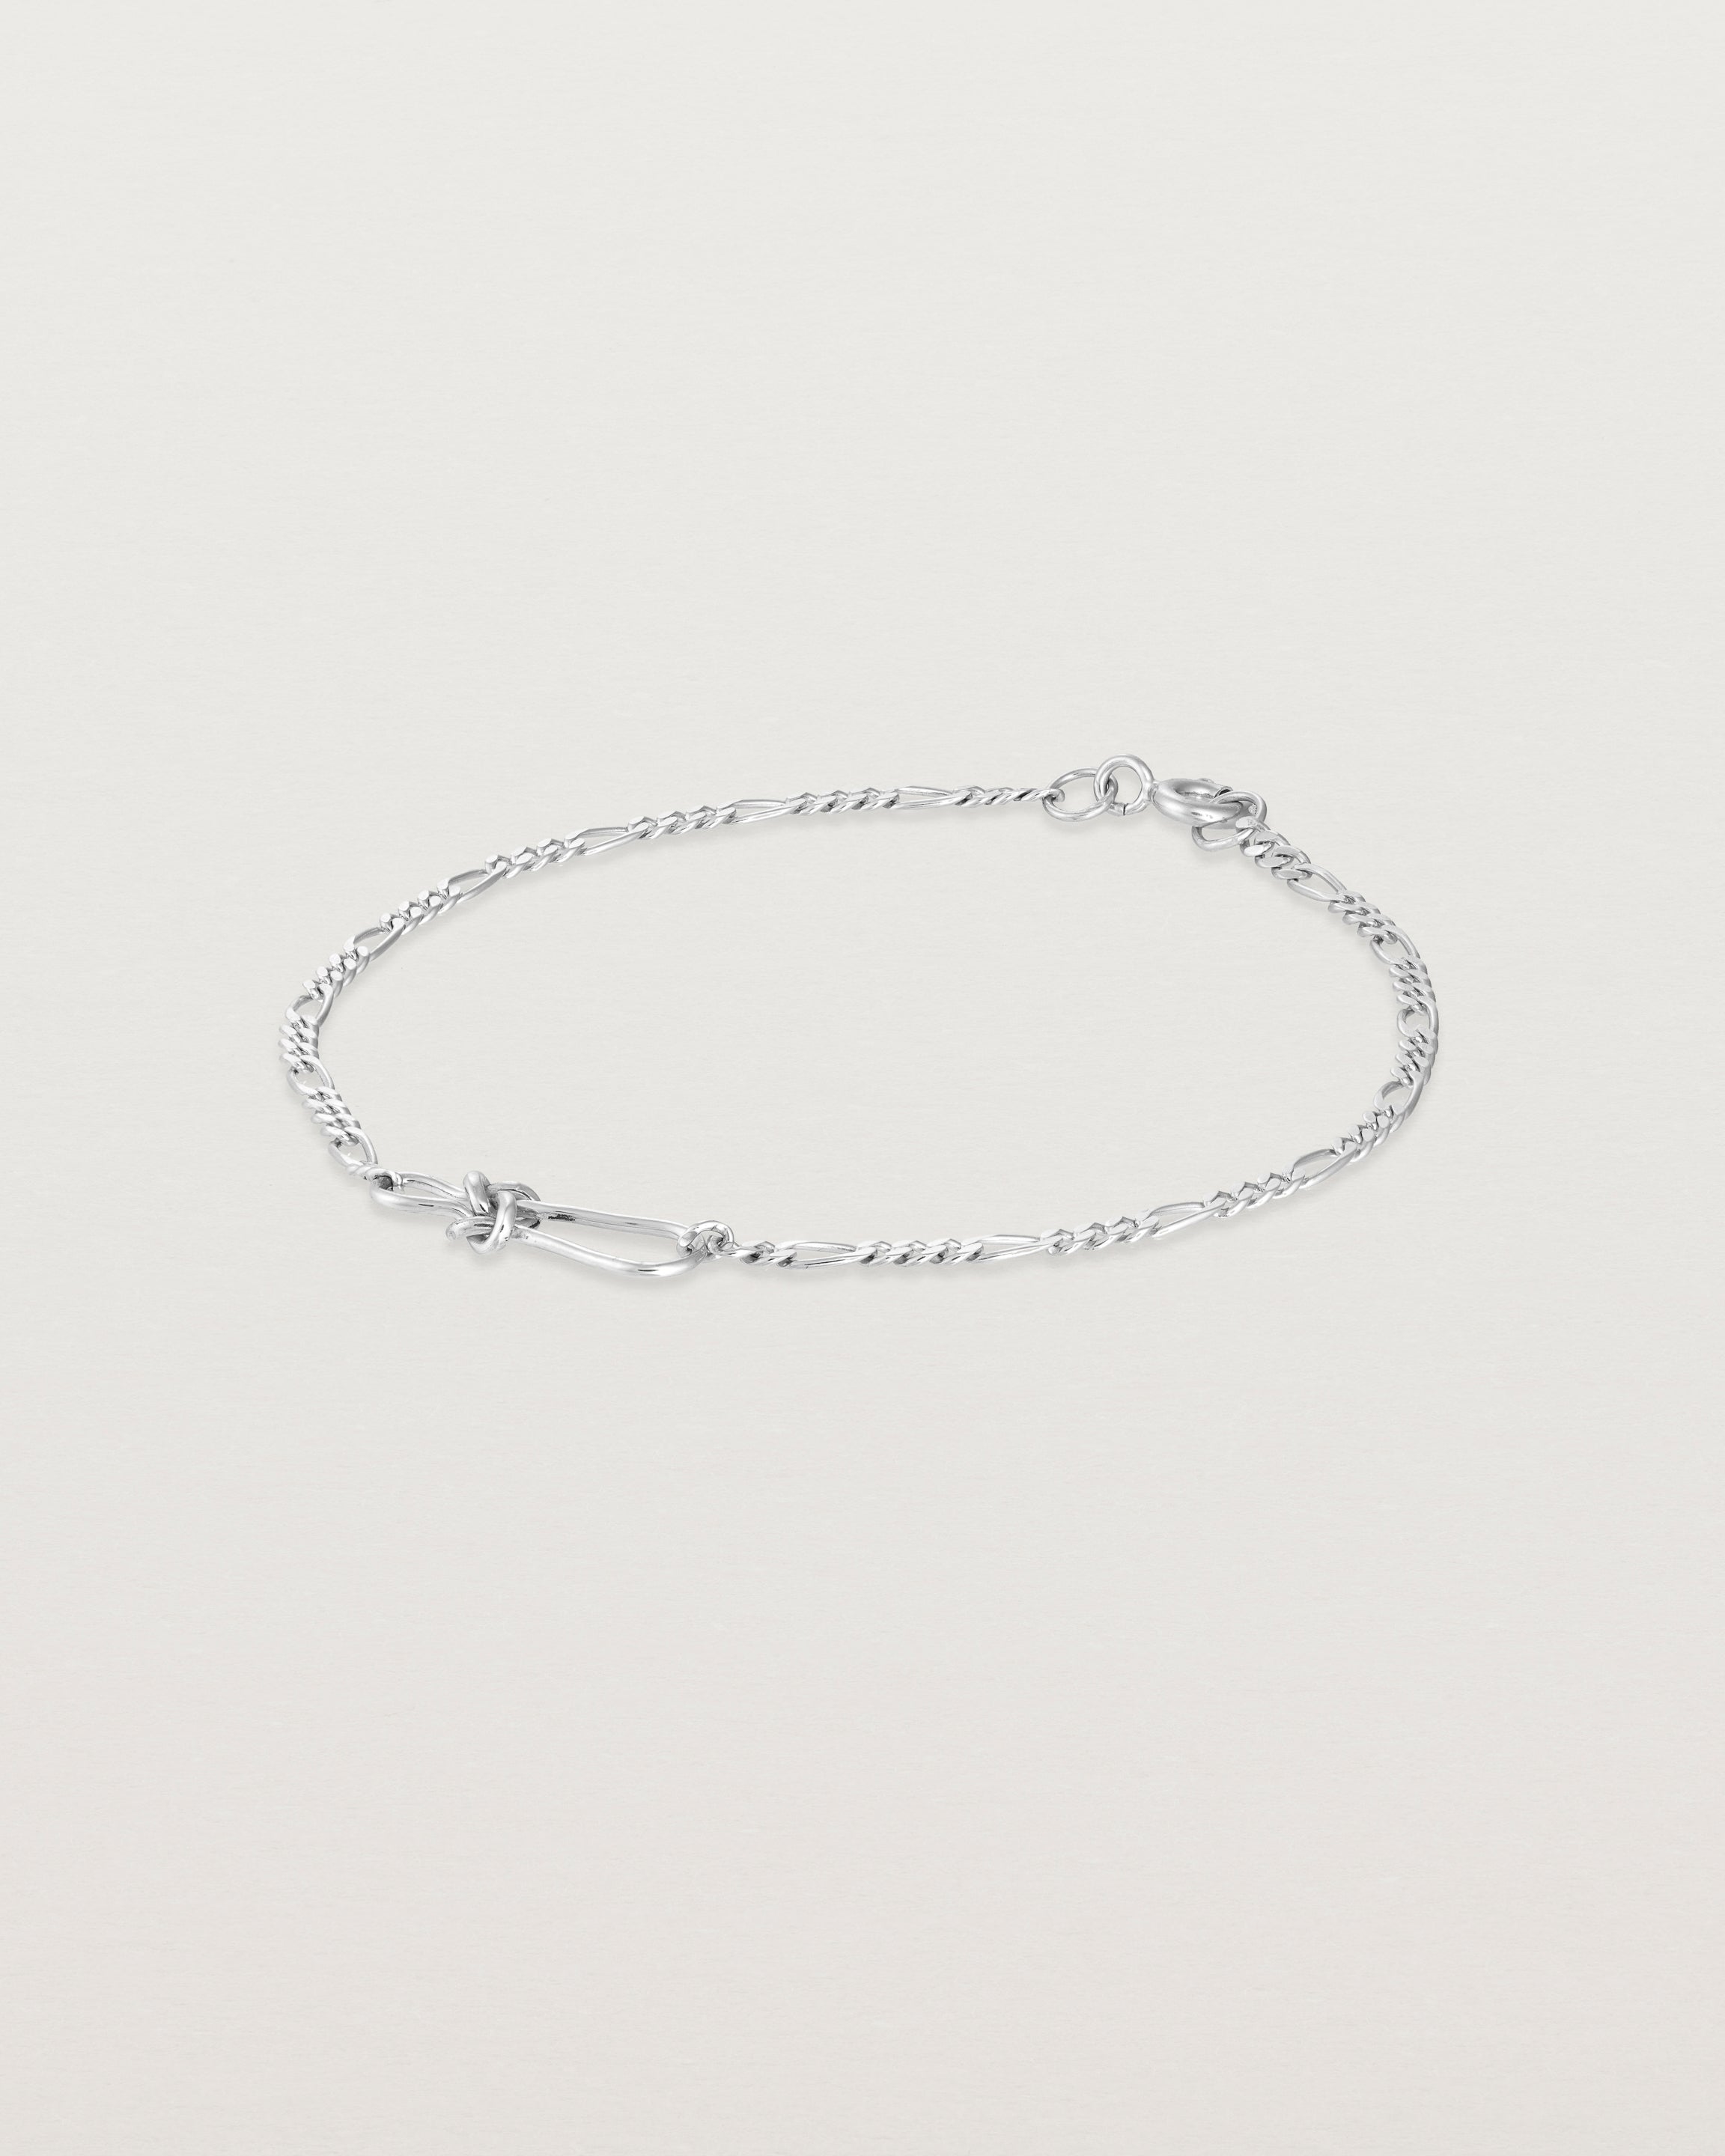 Angled view of the Anam Bracelet in sterling silver.